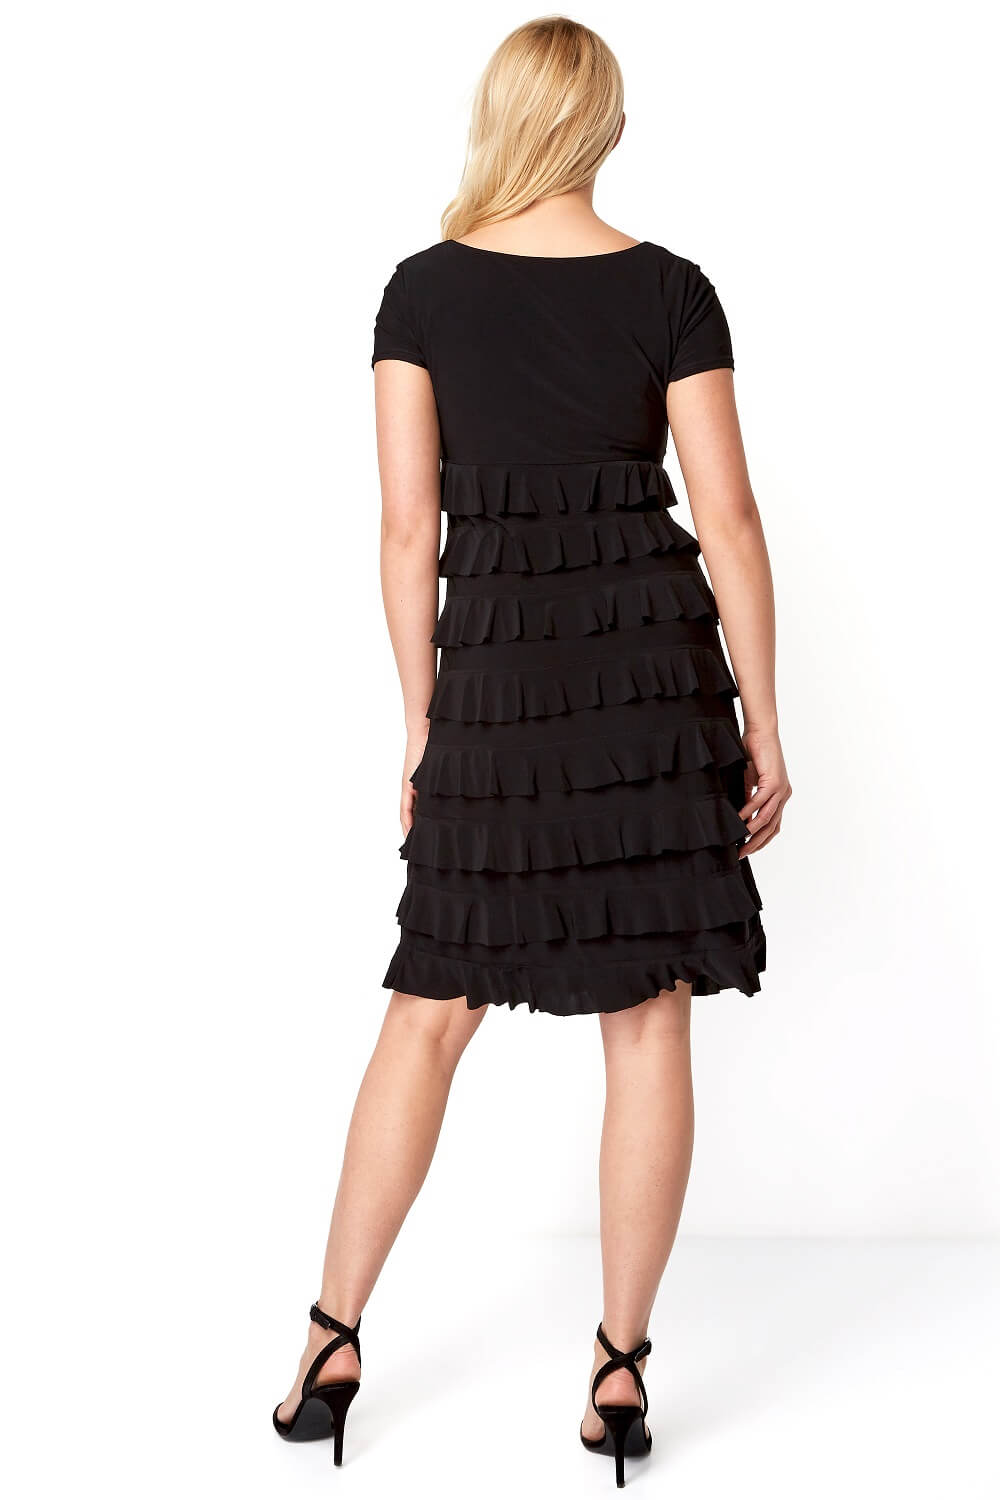 Black  Frill Tiered Dress, Image 3 of 4